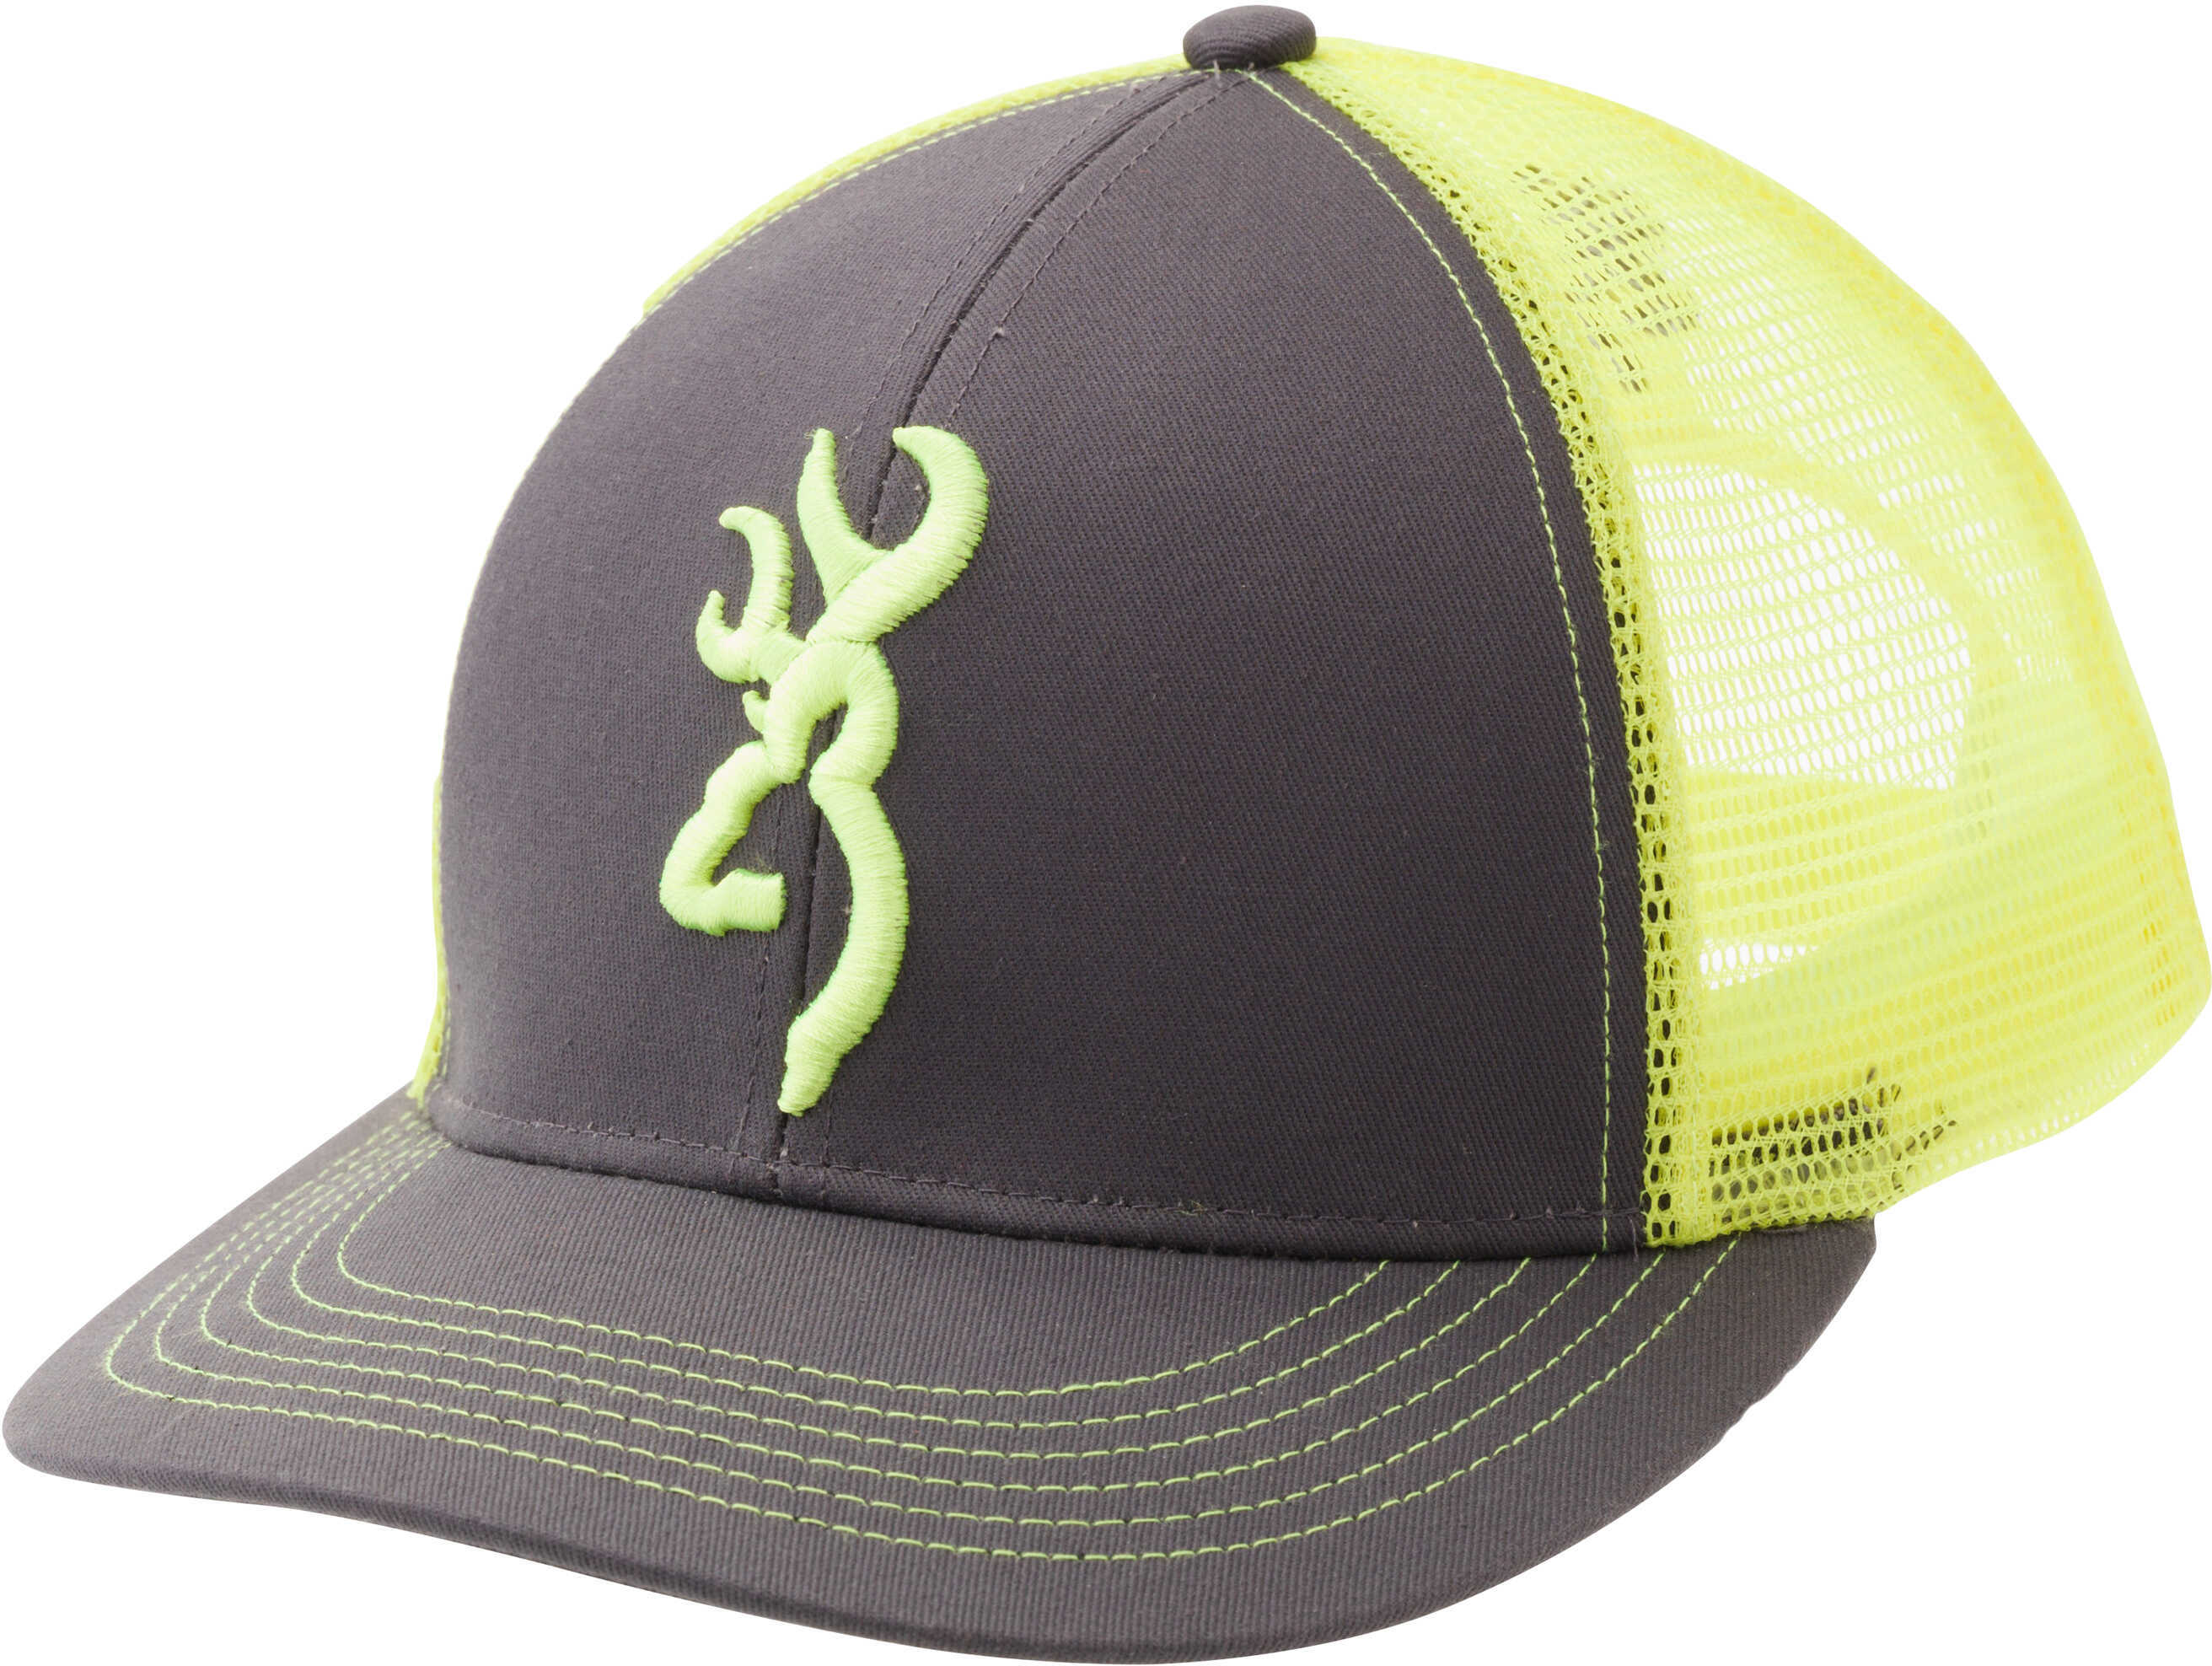 Browning Flashback Hat Charcoal/ Neon Green Model: 308177541